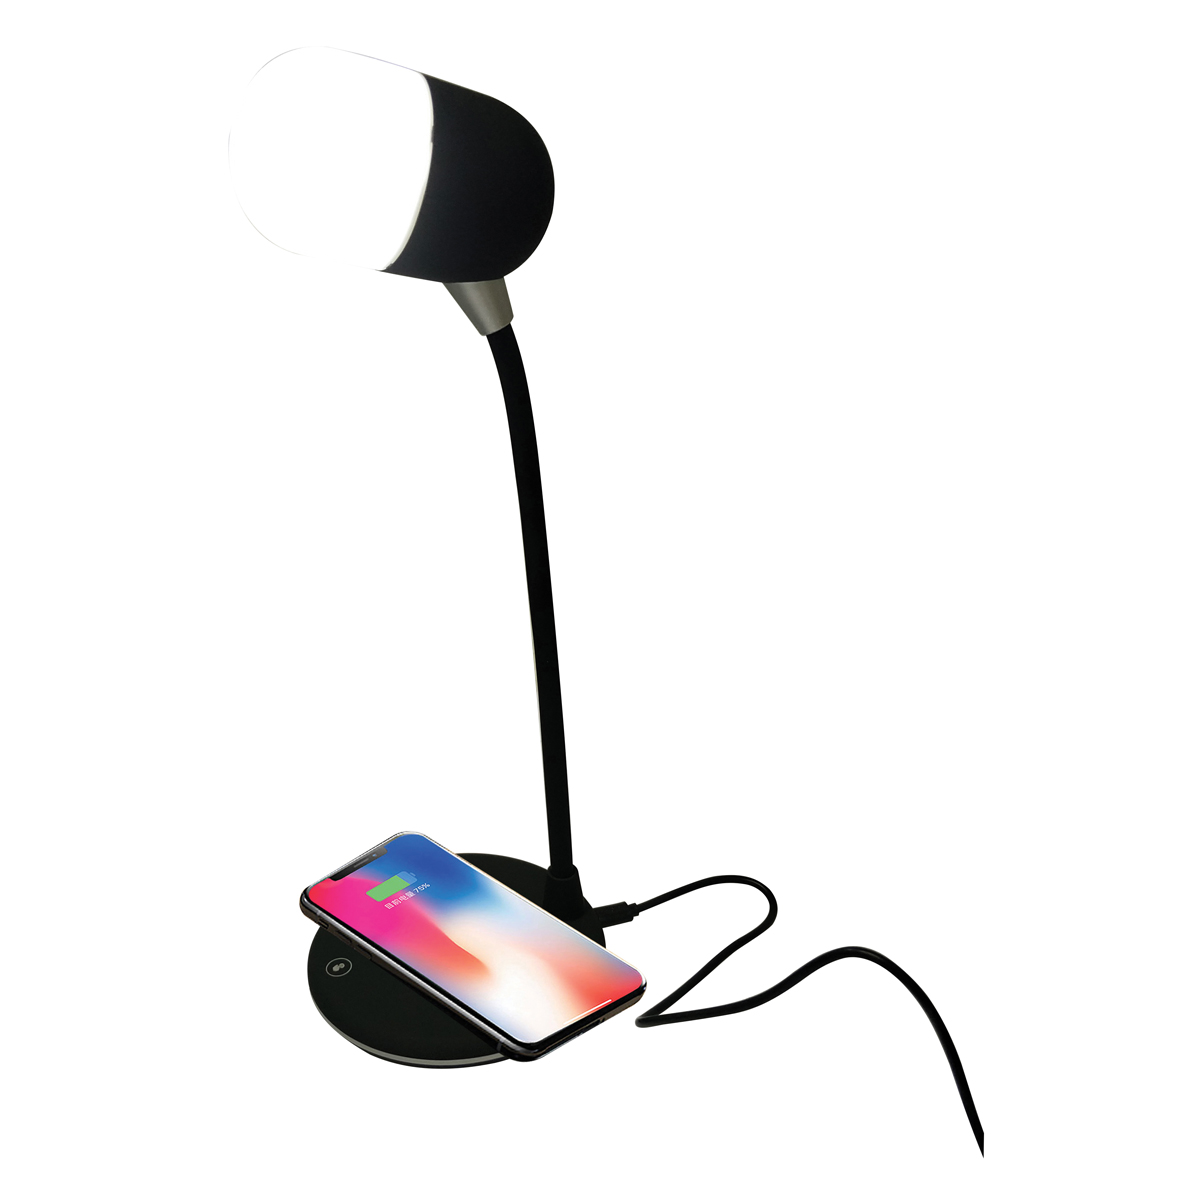 SH08 3-in-1 Speaker with Wireless Phone Charger and LED Lamp, Black